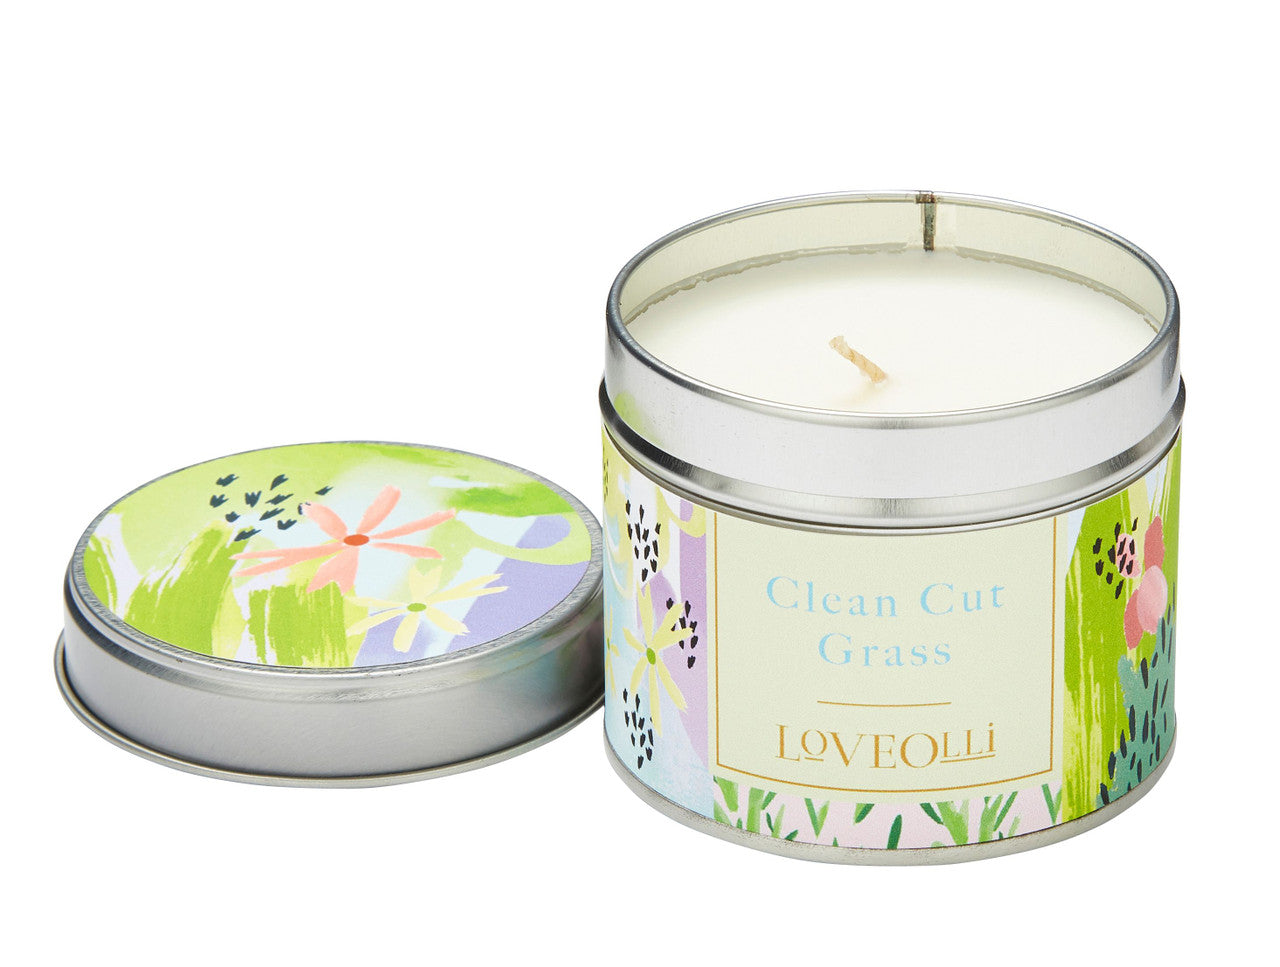 Love Olli Clean Cut Grass scented tin candle. Hand poured in the UK.